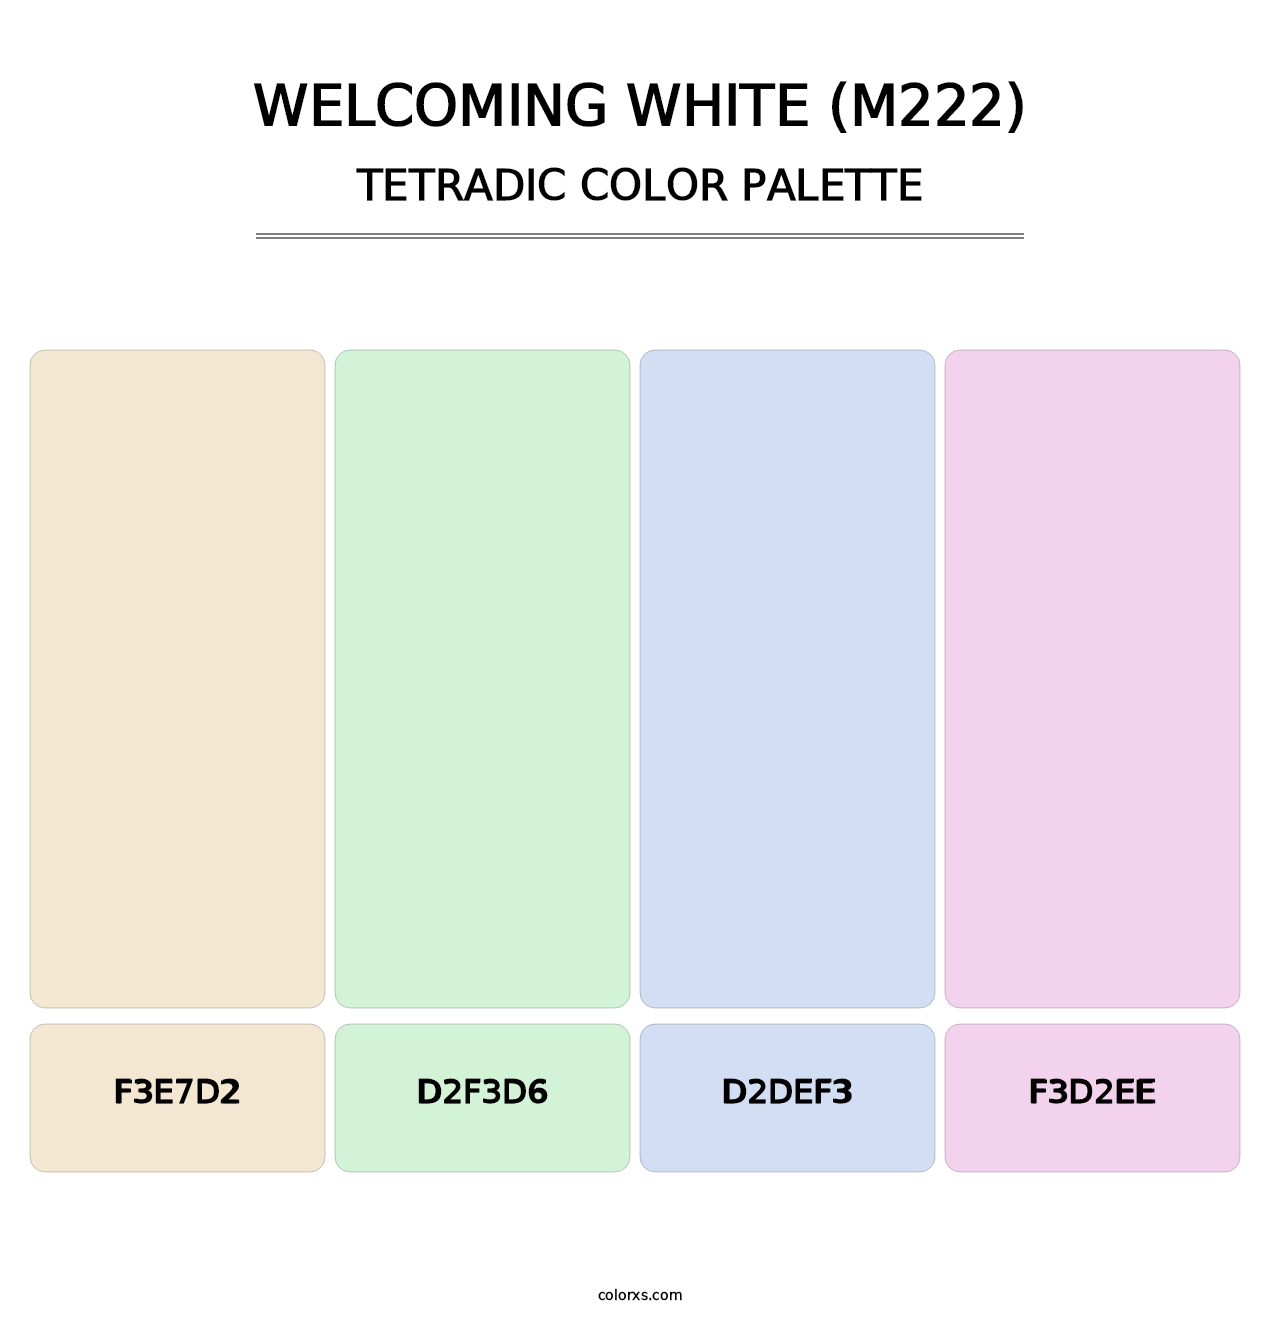 Welcoming White (M222) - Tetradic Color Palette